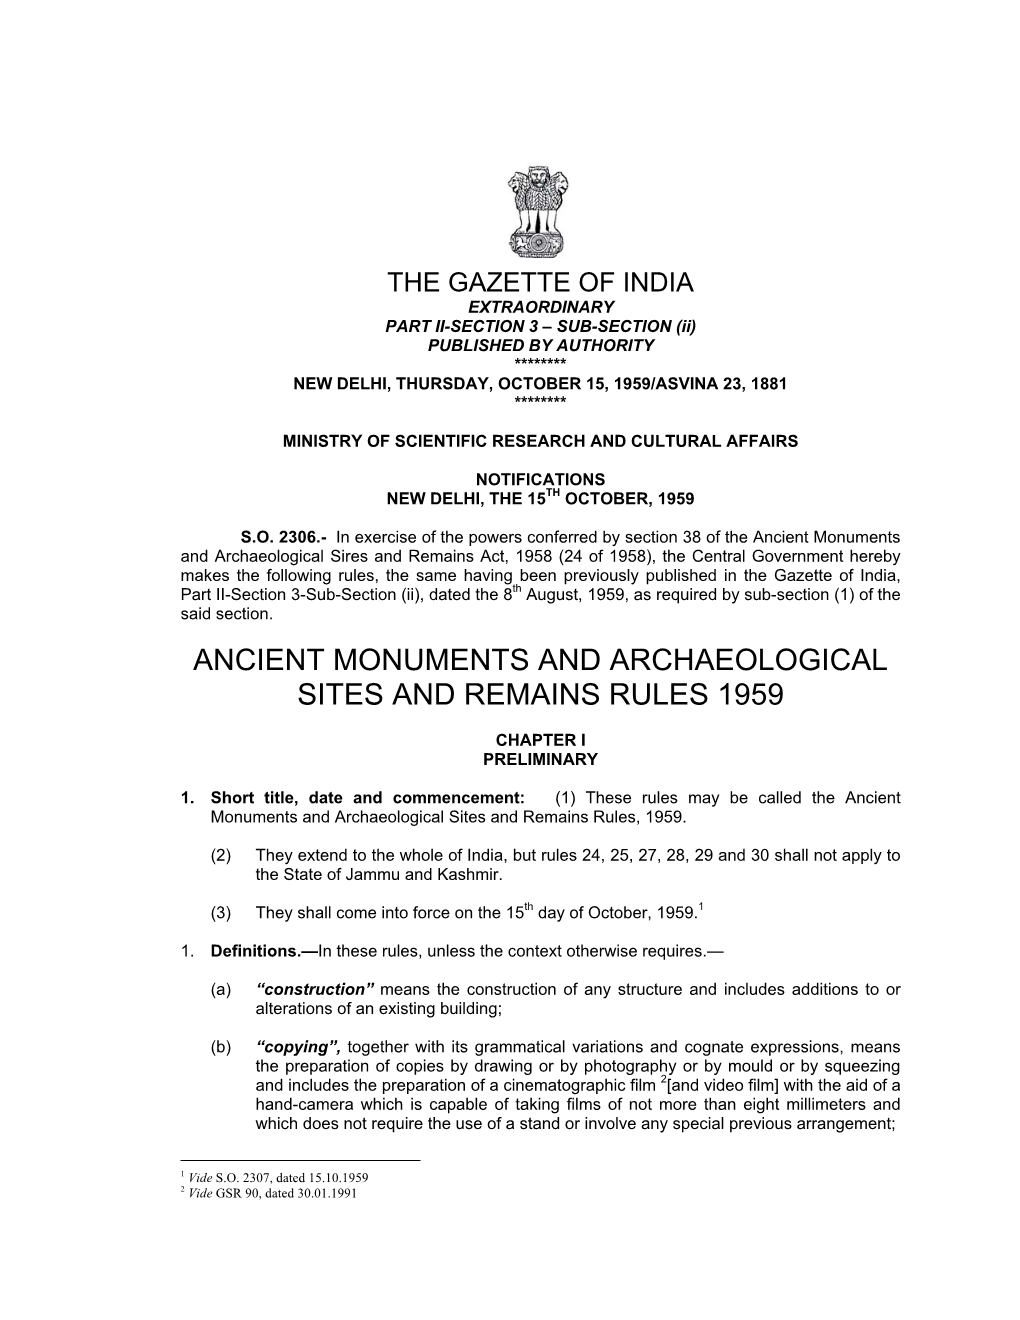 The Ancient Monuments and Archaeological Sites and Remains Rules, 1959